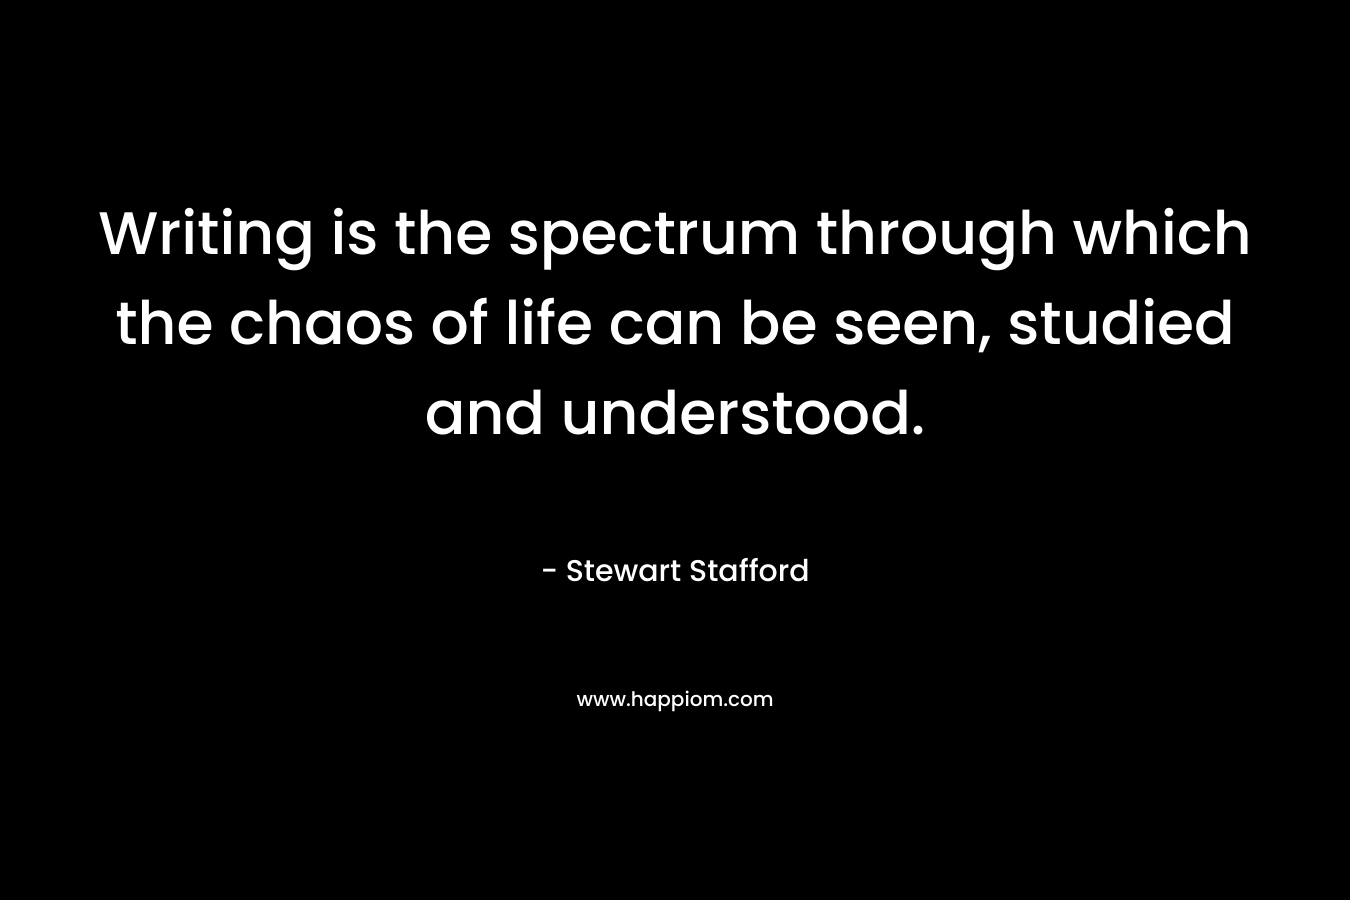 Writing is the spectrum through which the chaos of life can be seen, studied and understood. – Stewart Stafford